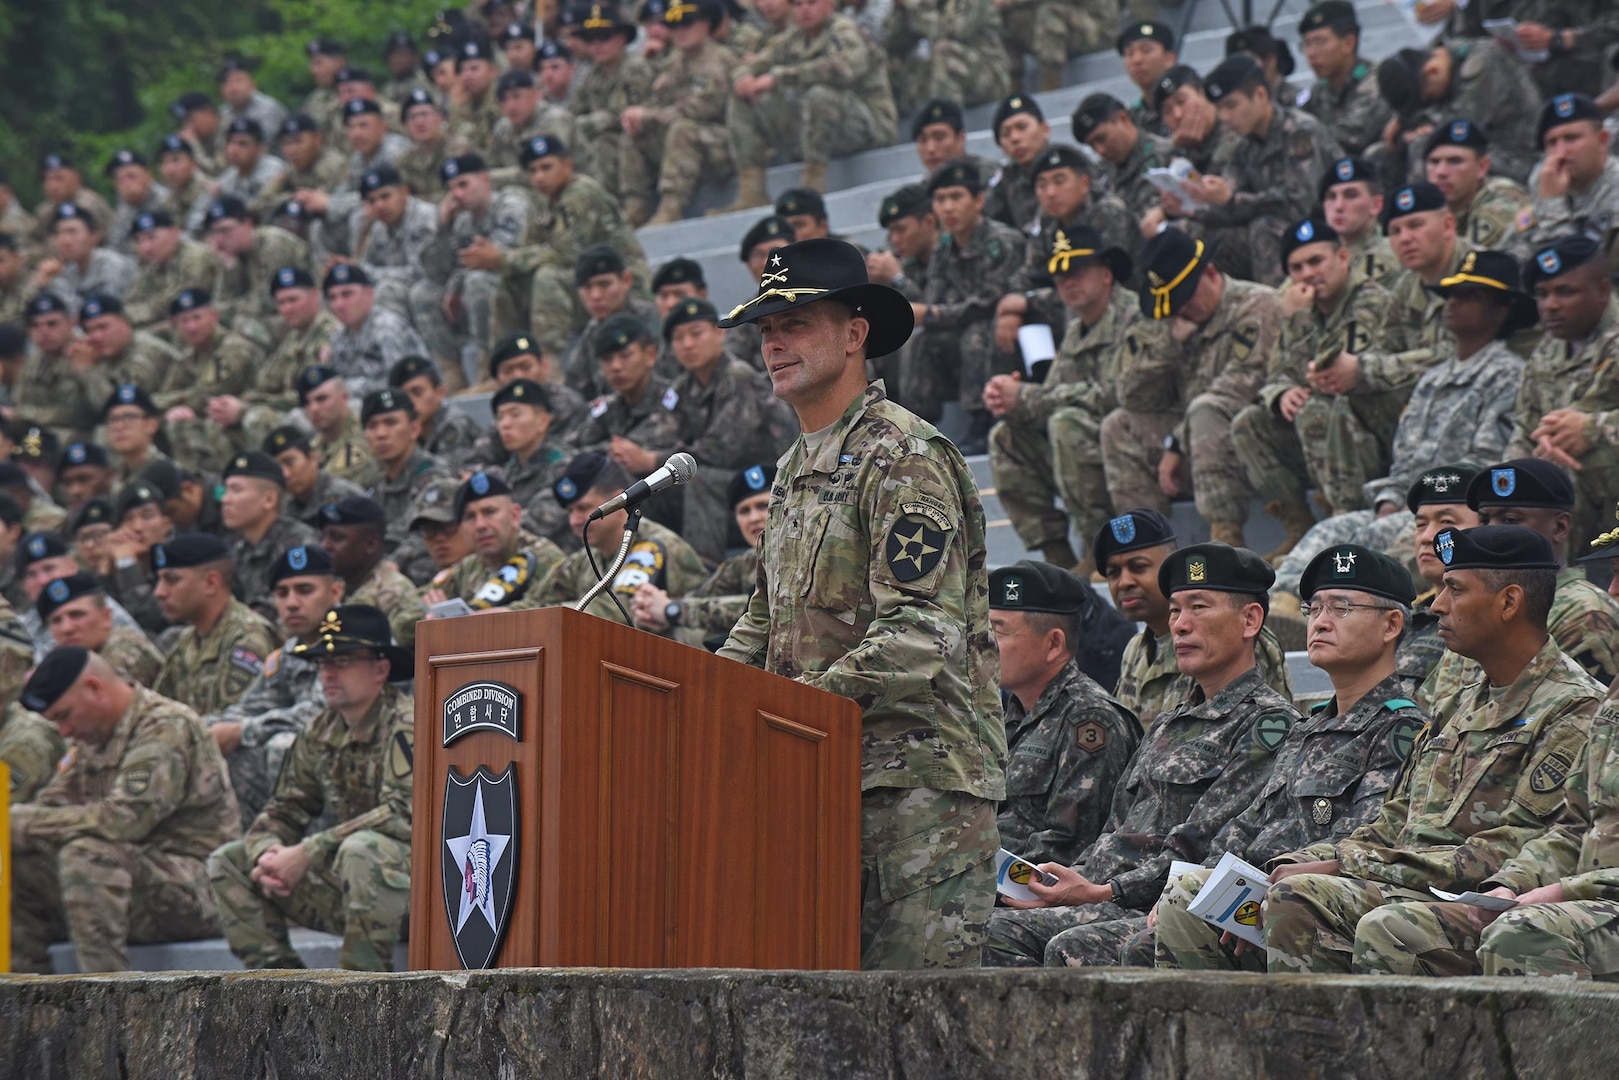 Brig. Gen. Brian Mennes, deputy commanding general for maneuver, 2nd Infantry Division, discusses the importance of the Expert Infantryman Badge and congratulates the U.S. and South Korean Soldiers that earned the badge, during a ceremony May 26 at the Schoonover Bowl, Camp Casey, South Korea. (U.S. Army photo by Staff Sgt. Keith Anderson, 1st Armored Brigade Combat Team Public Affairs, 1st Cav. Div.)